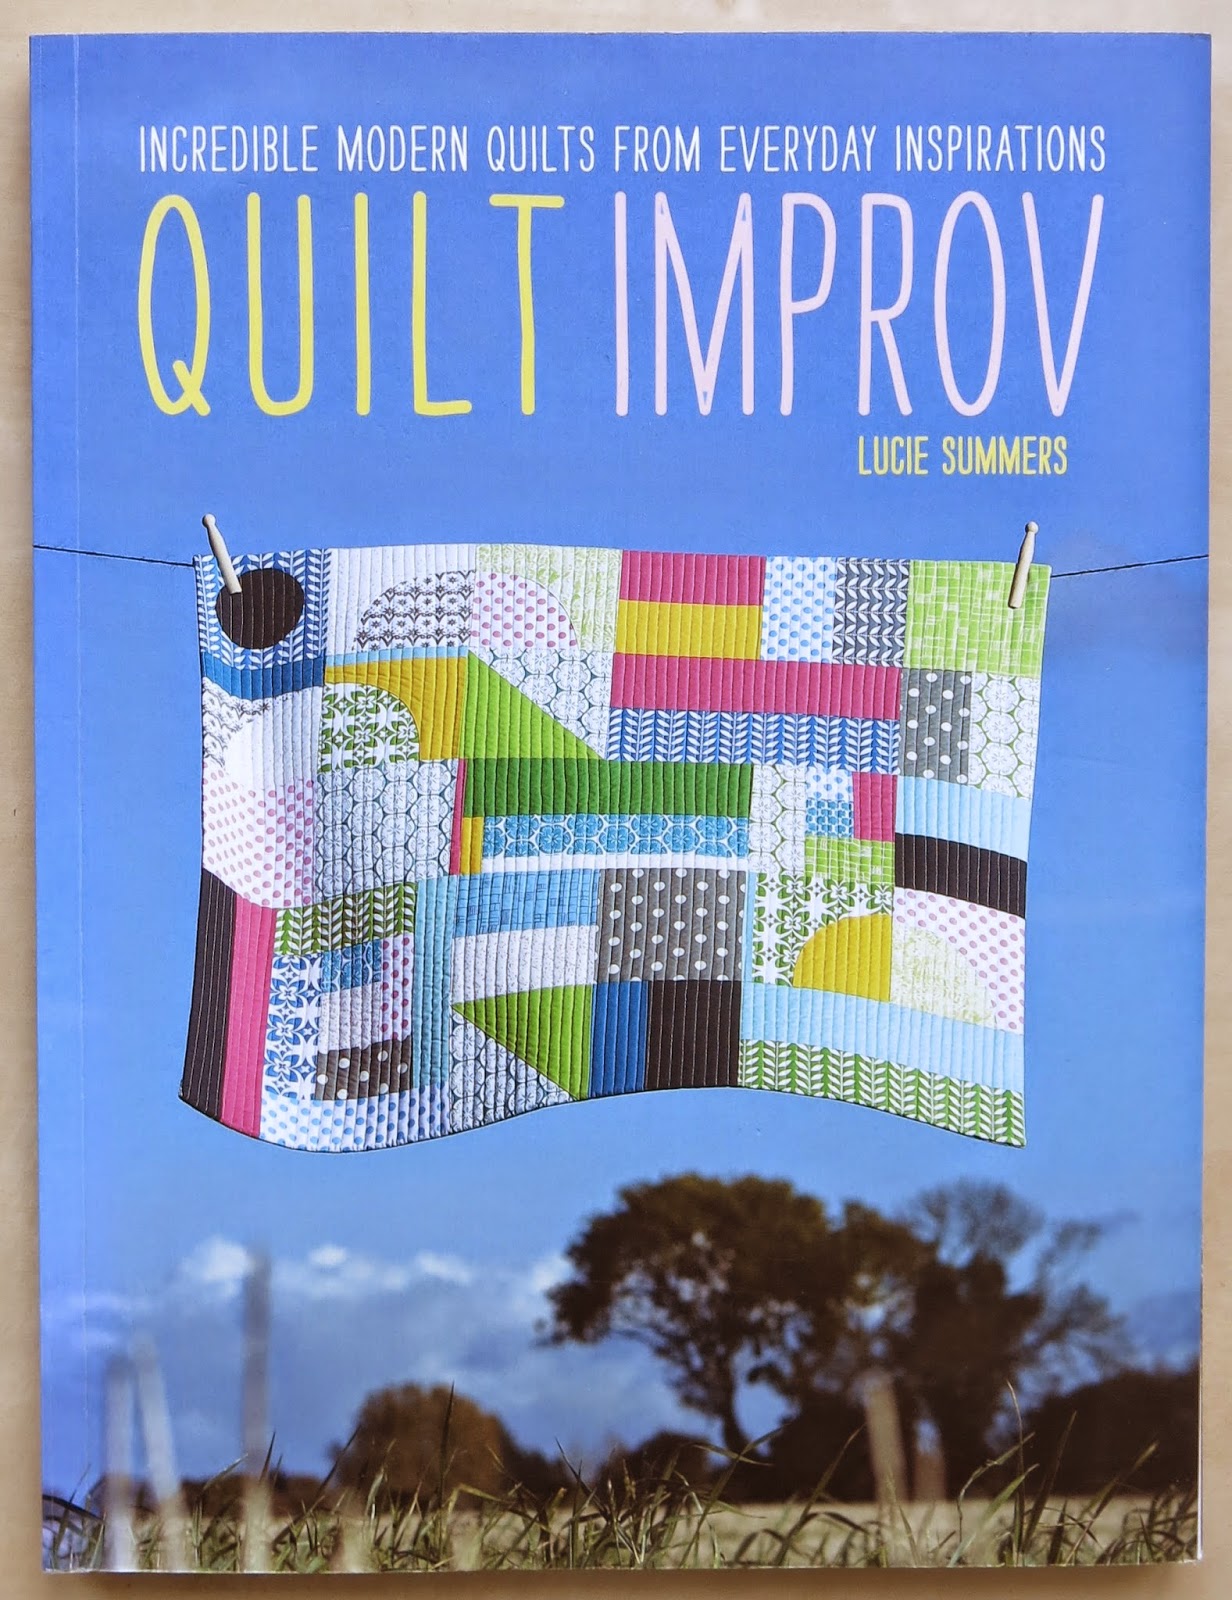 Lucie Summers book "Quilt Improv"